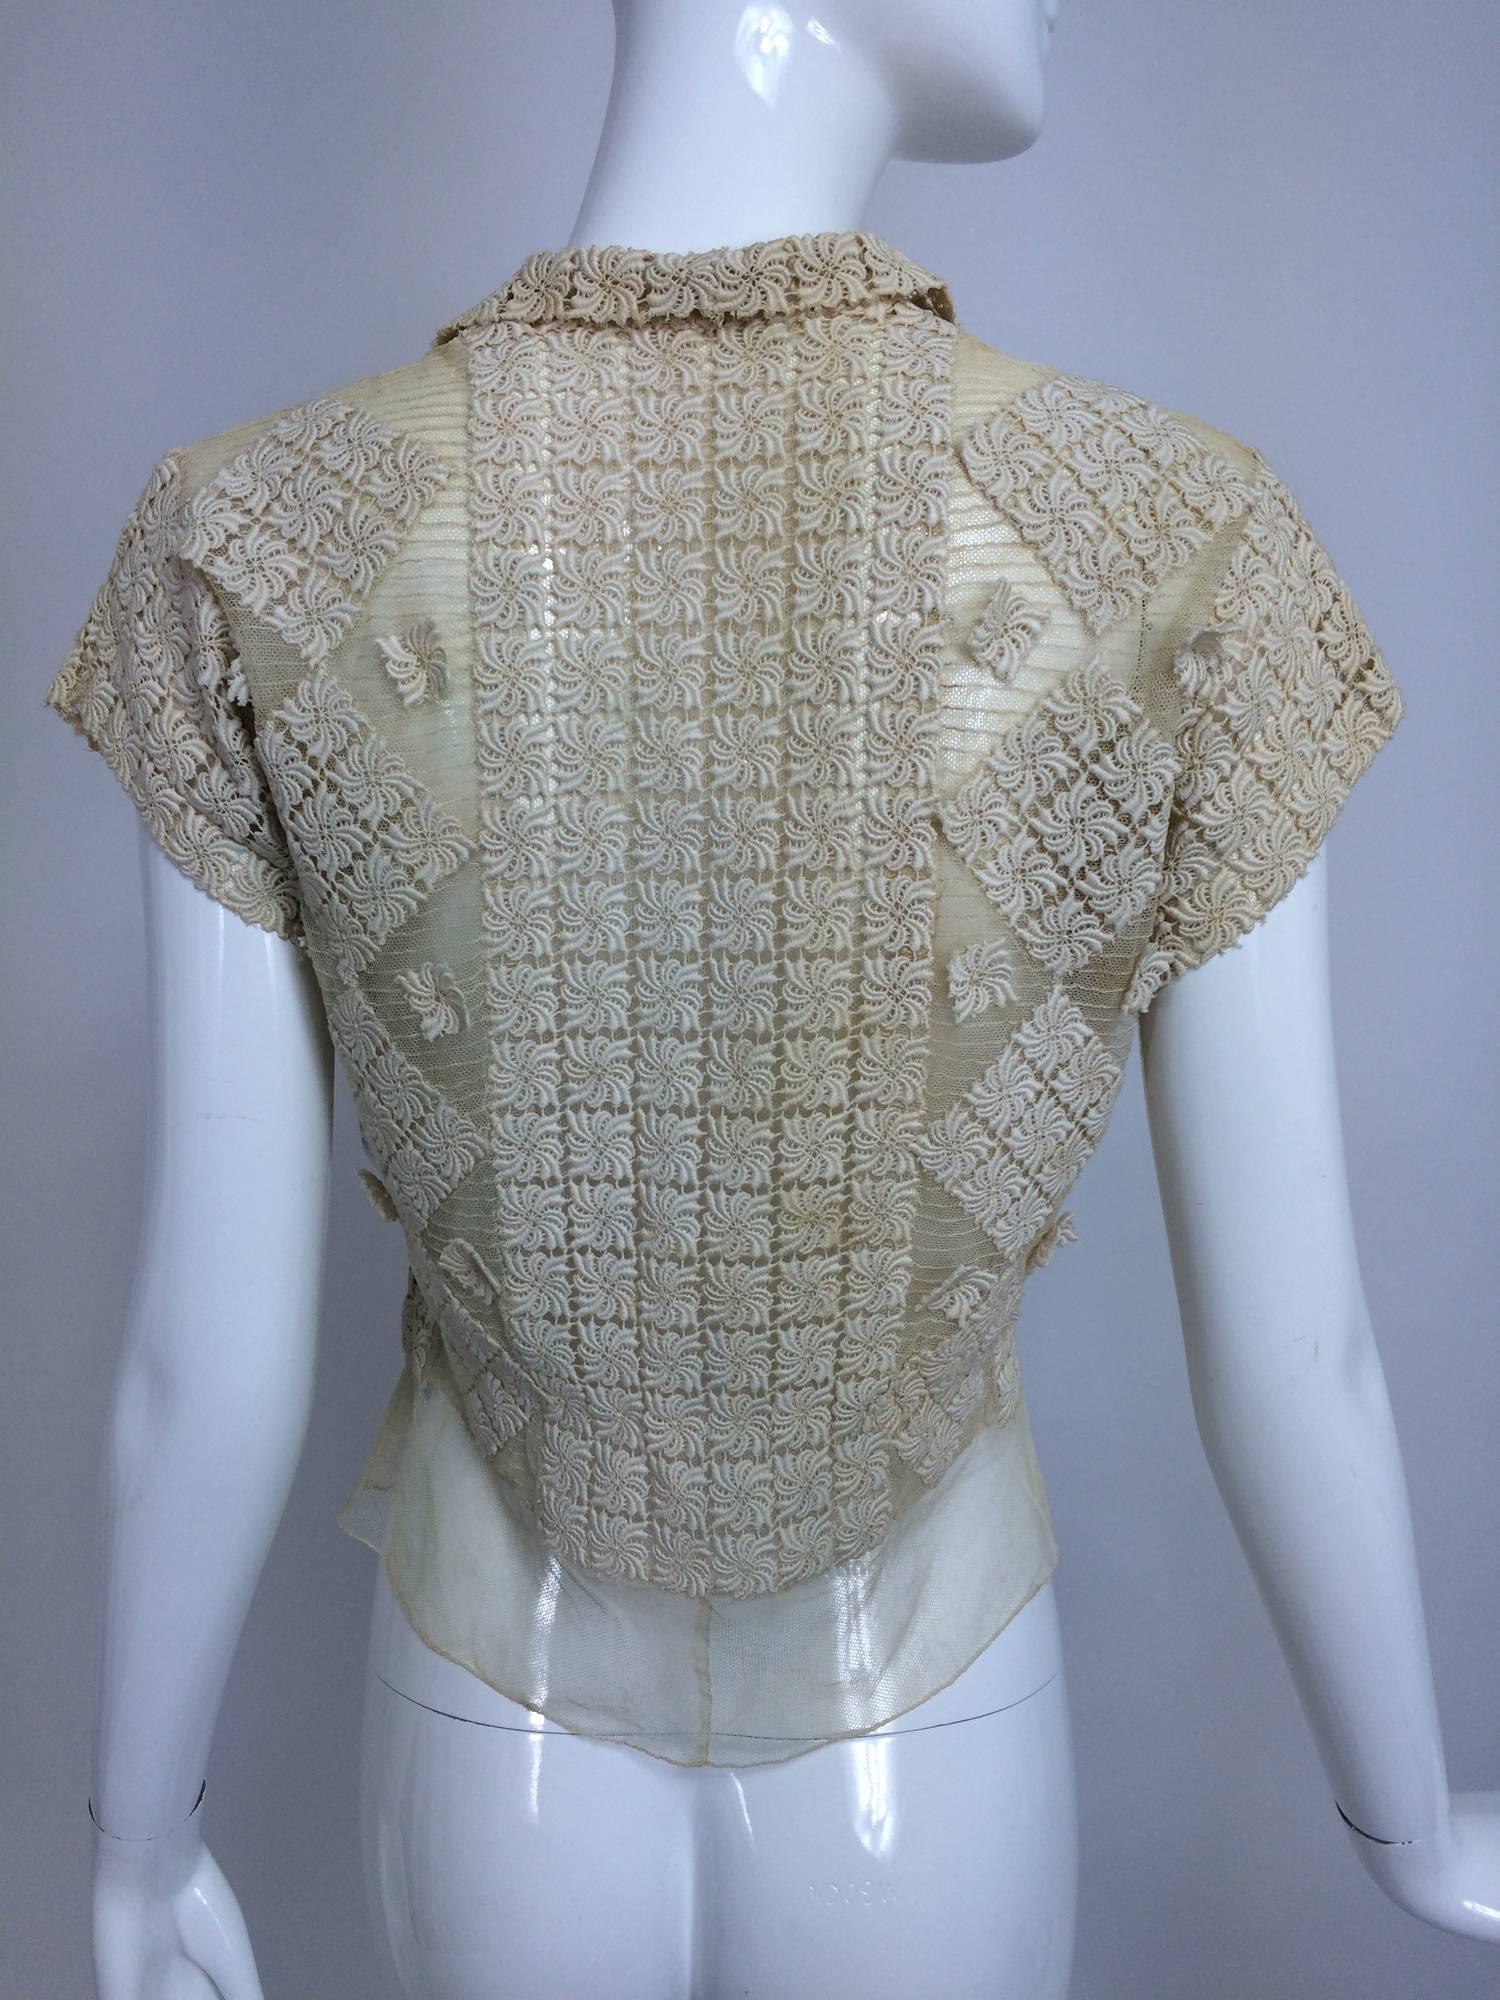 A beautiful 1930s blouse of sheer cotton tulle in cream with applique lace done in an all over design...Short sleeves, button front closes with milky glass buttons...Slightly fitted with tulle peplum...Fits like a size small...

In excellent